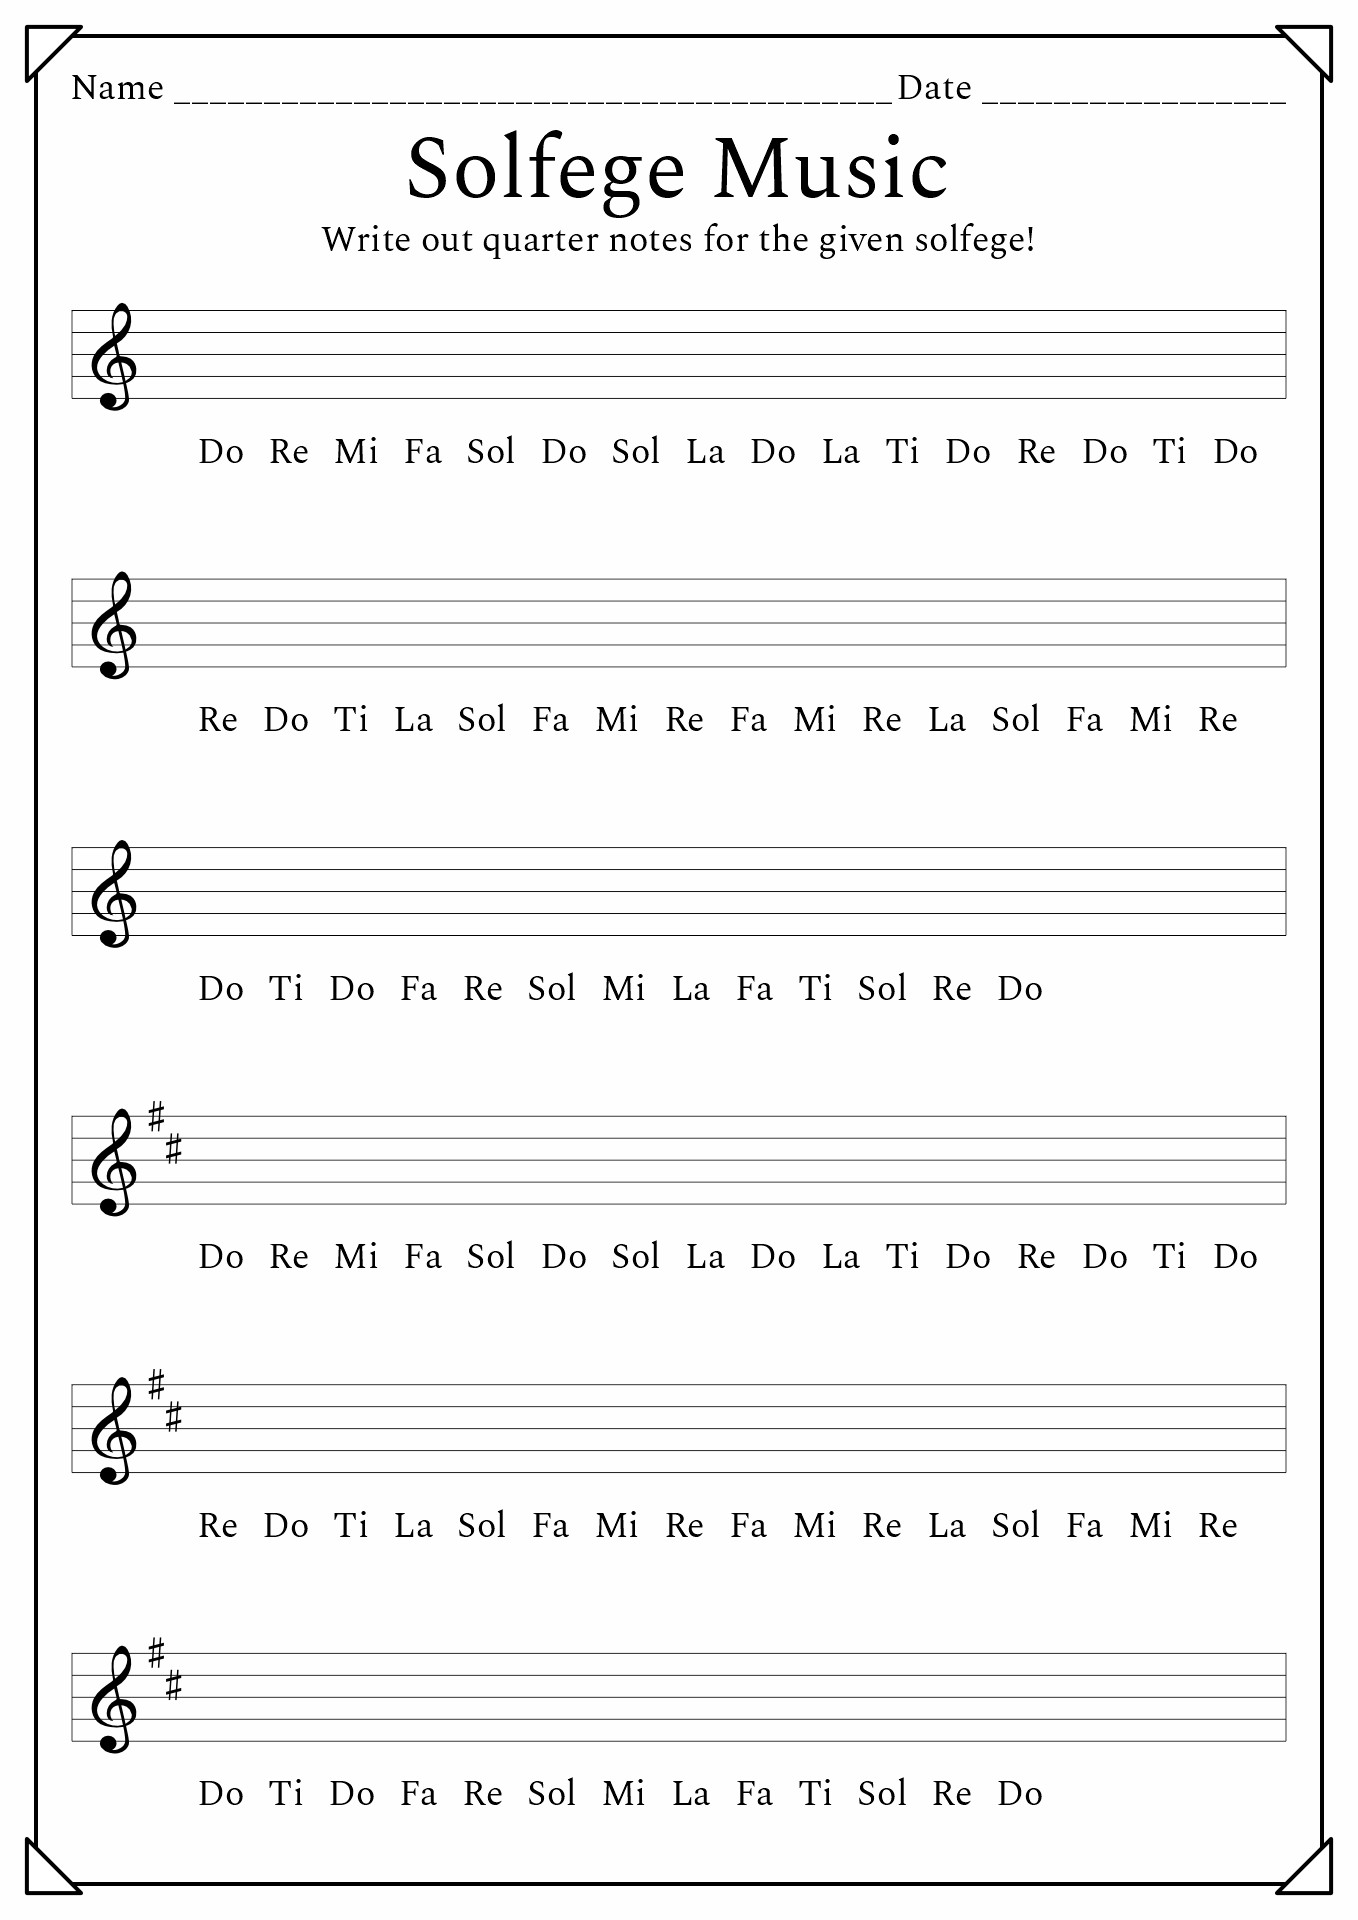 13-best-images-of-sight-reading-music-christmas-worksheet-rhythm-sight-reading-worksheet